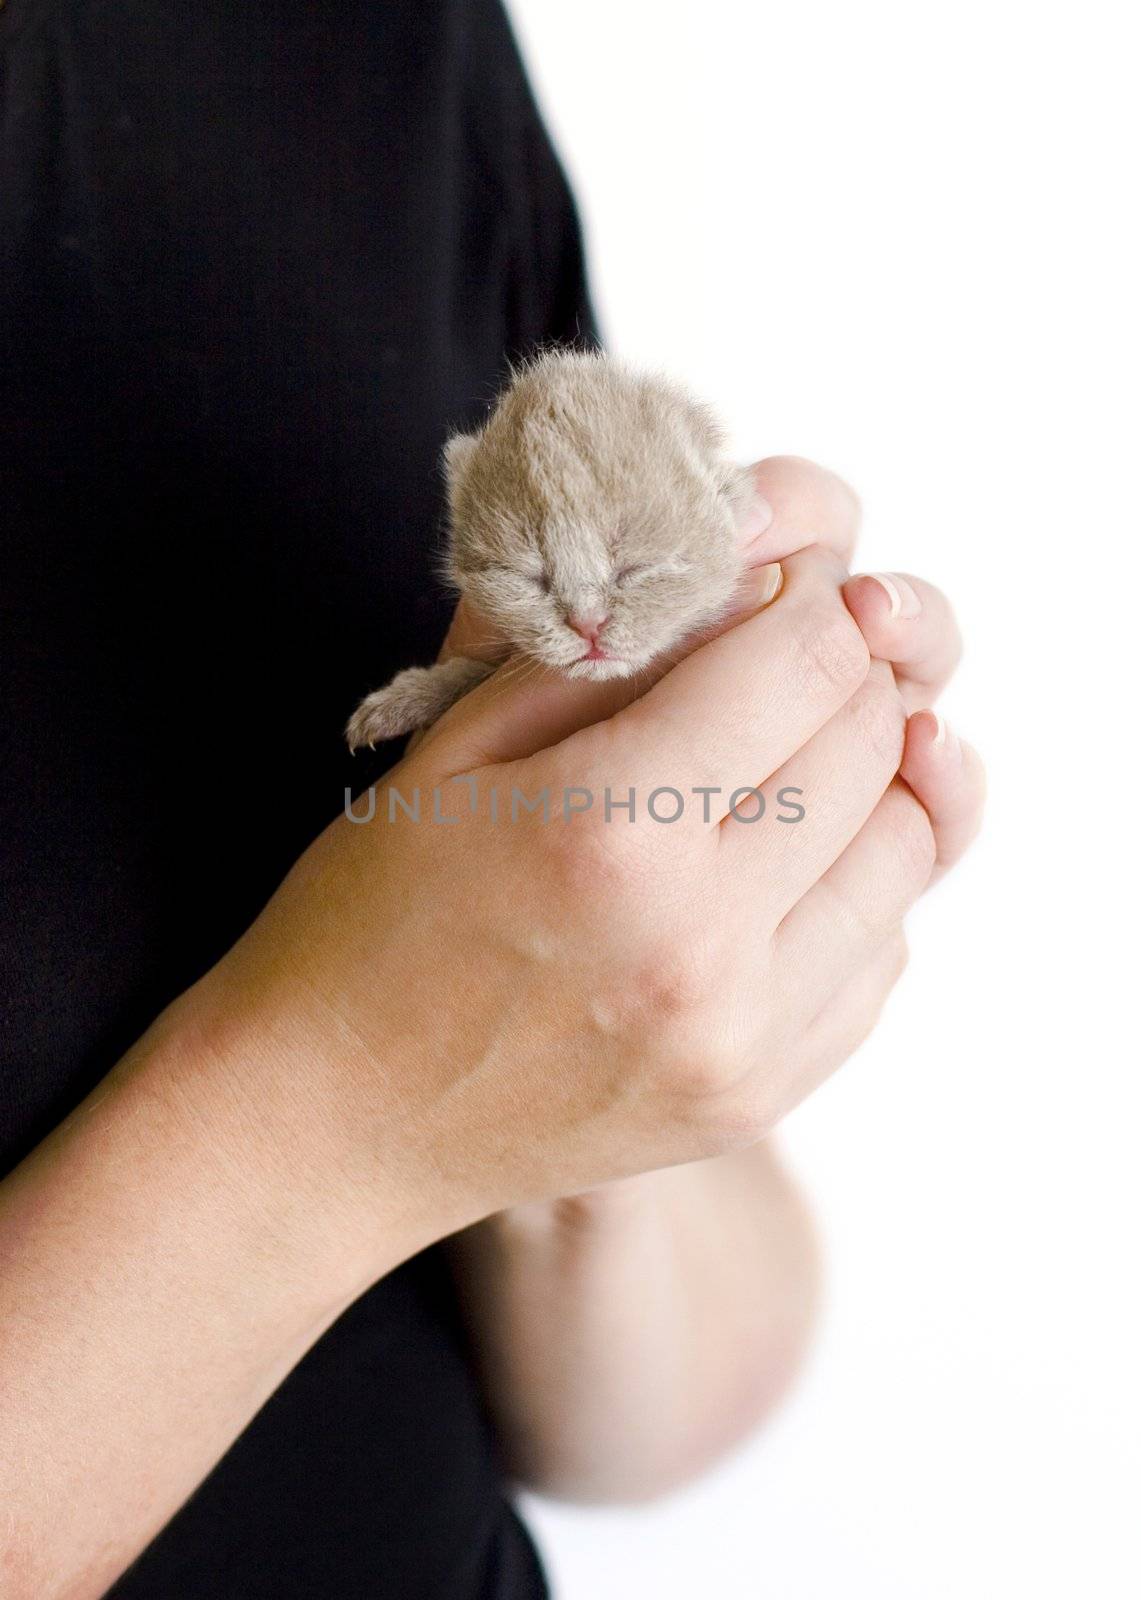 Very small kitty (3 days) in human hands.